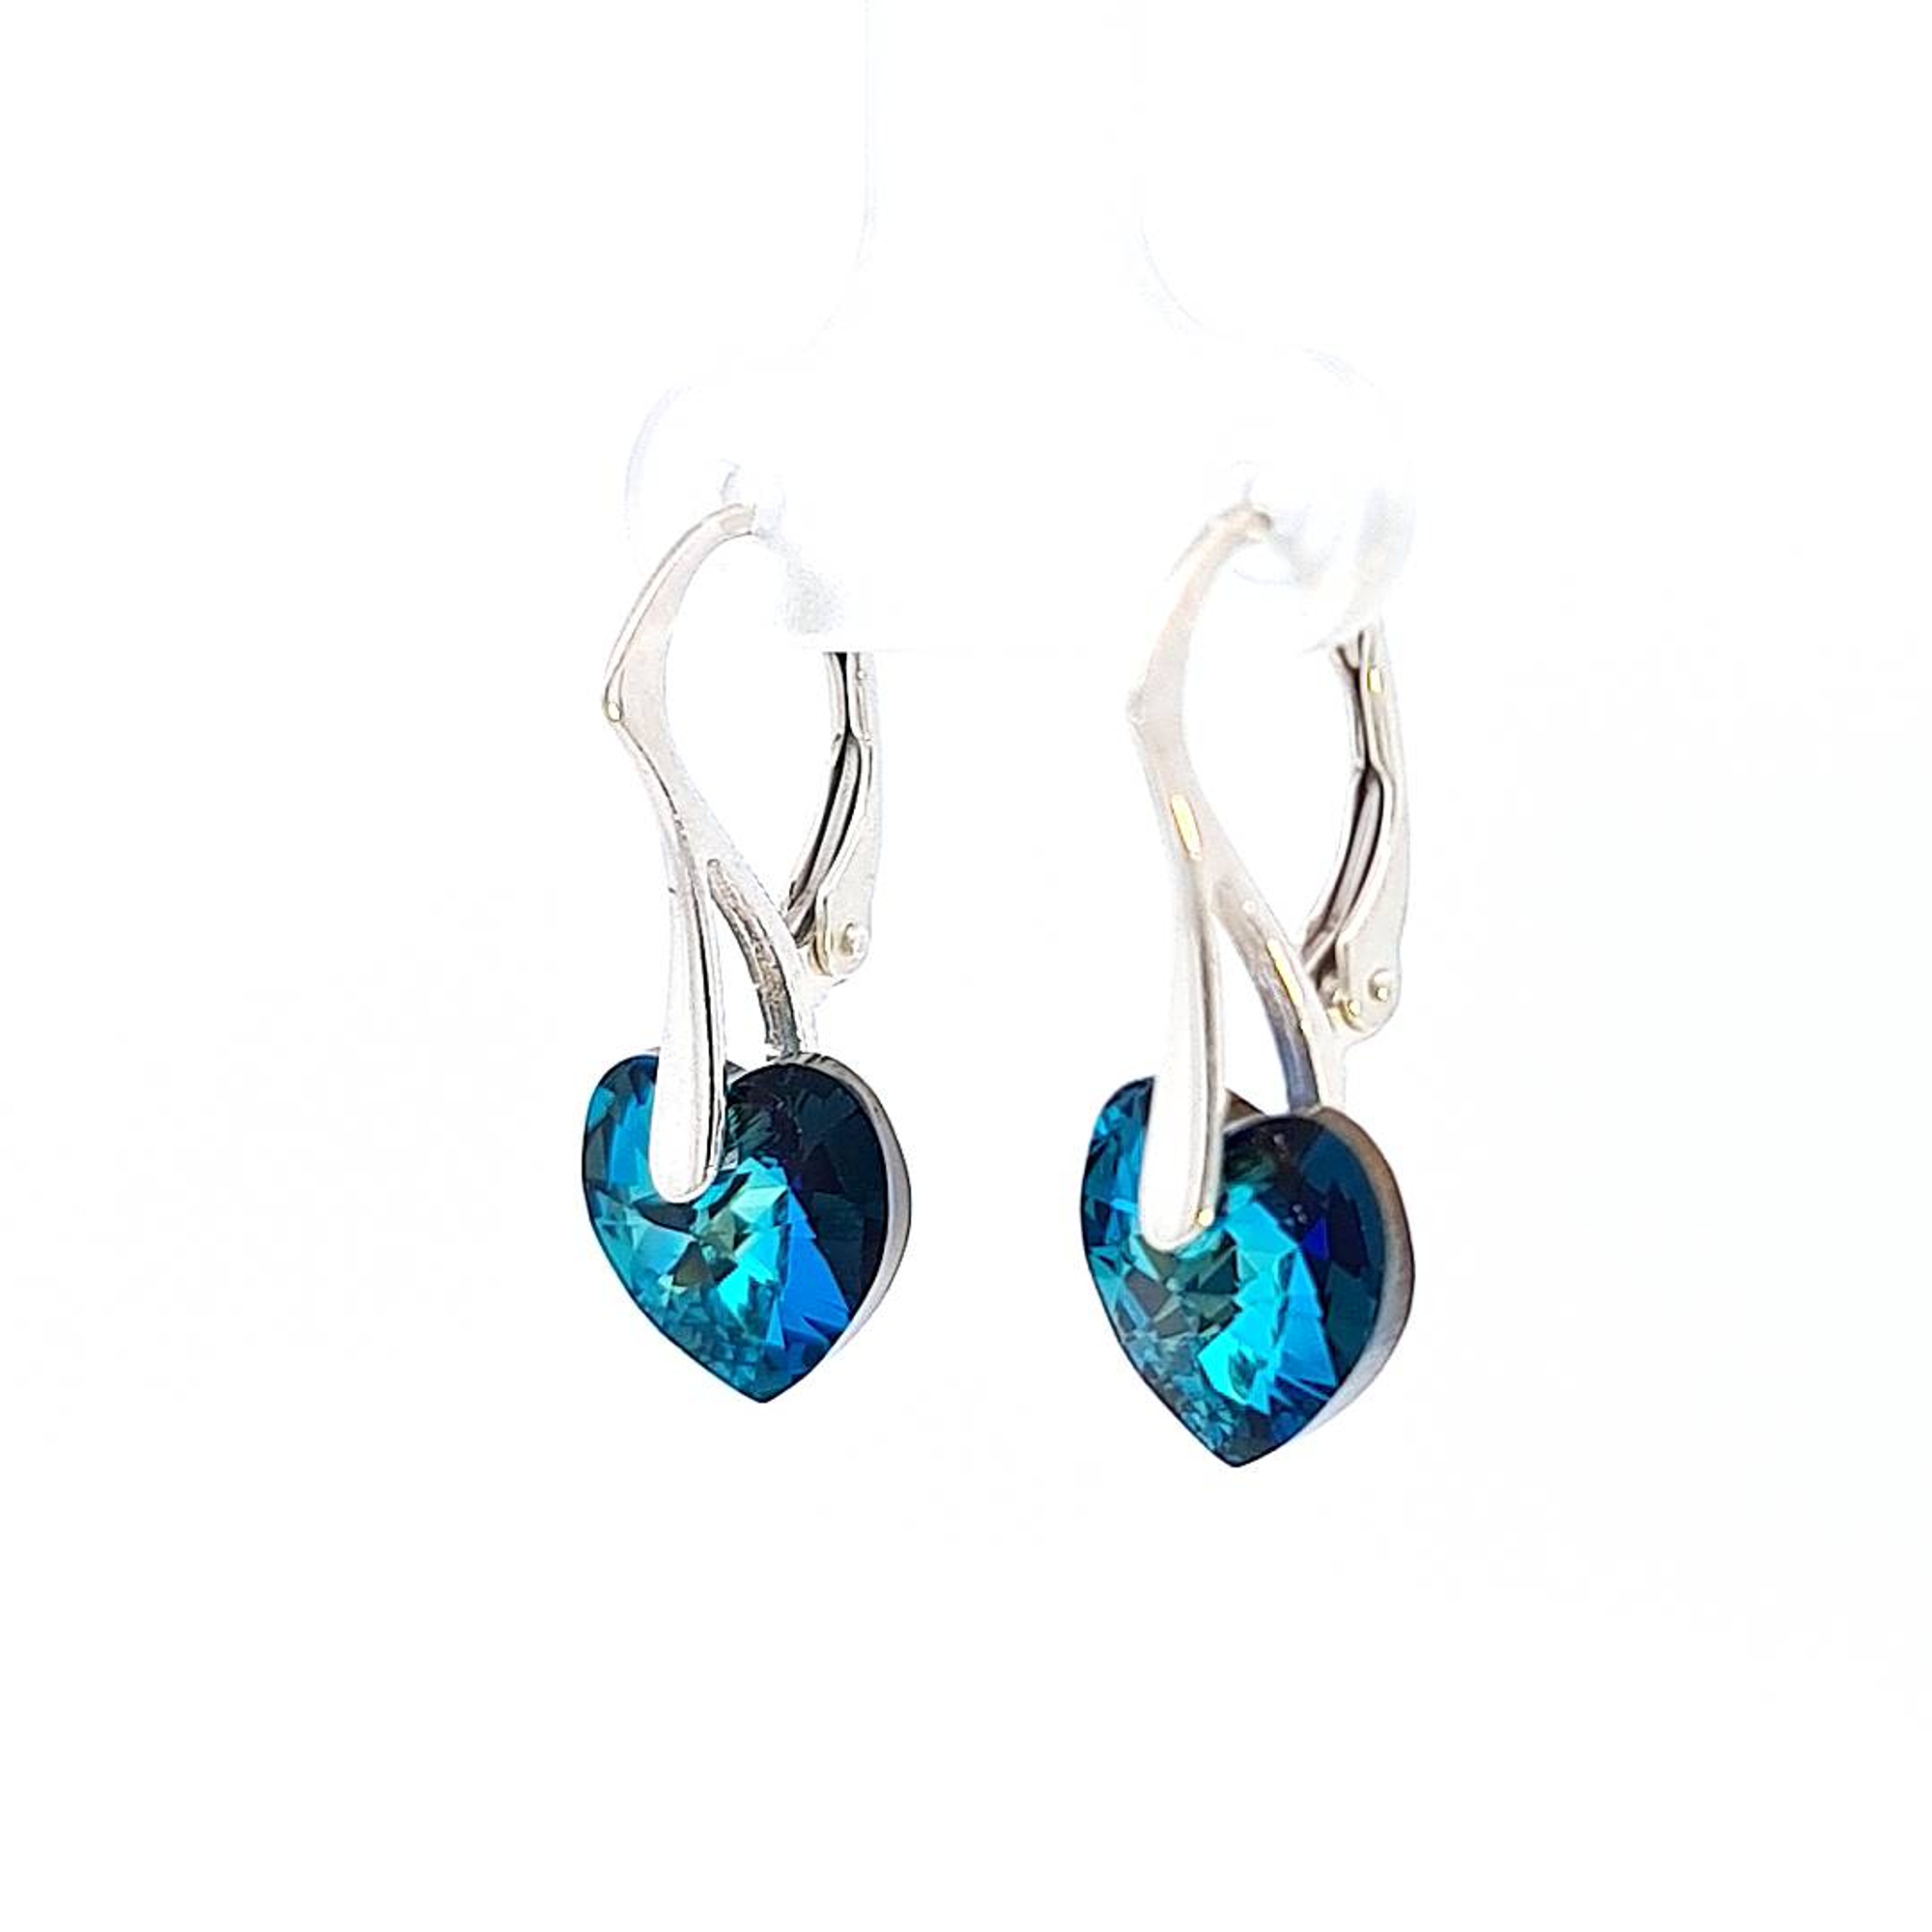 Side View of Bermuda Blue Dainty Heart Earrings - Showcasing the Depth of Colour and Sterling Silver Craftsmanship